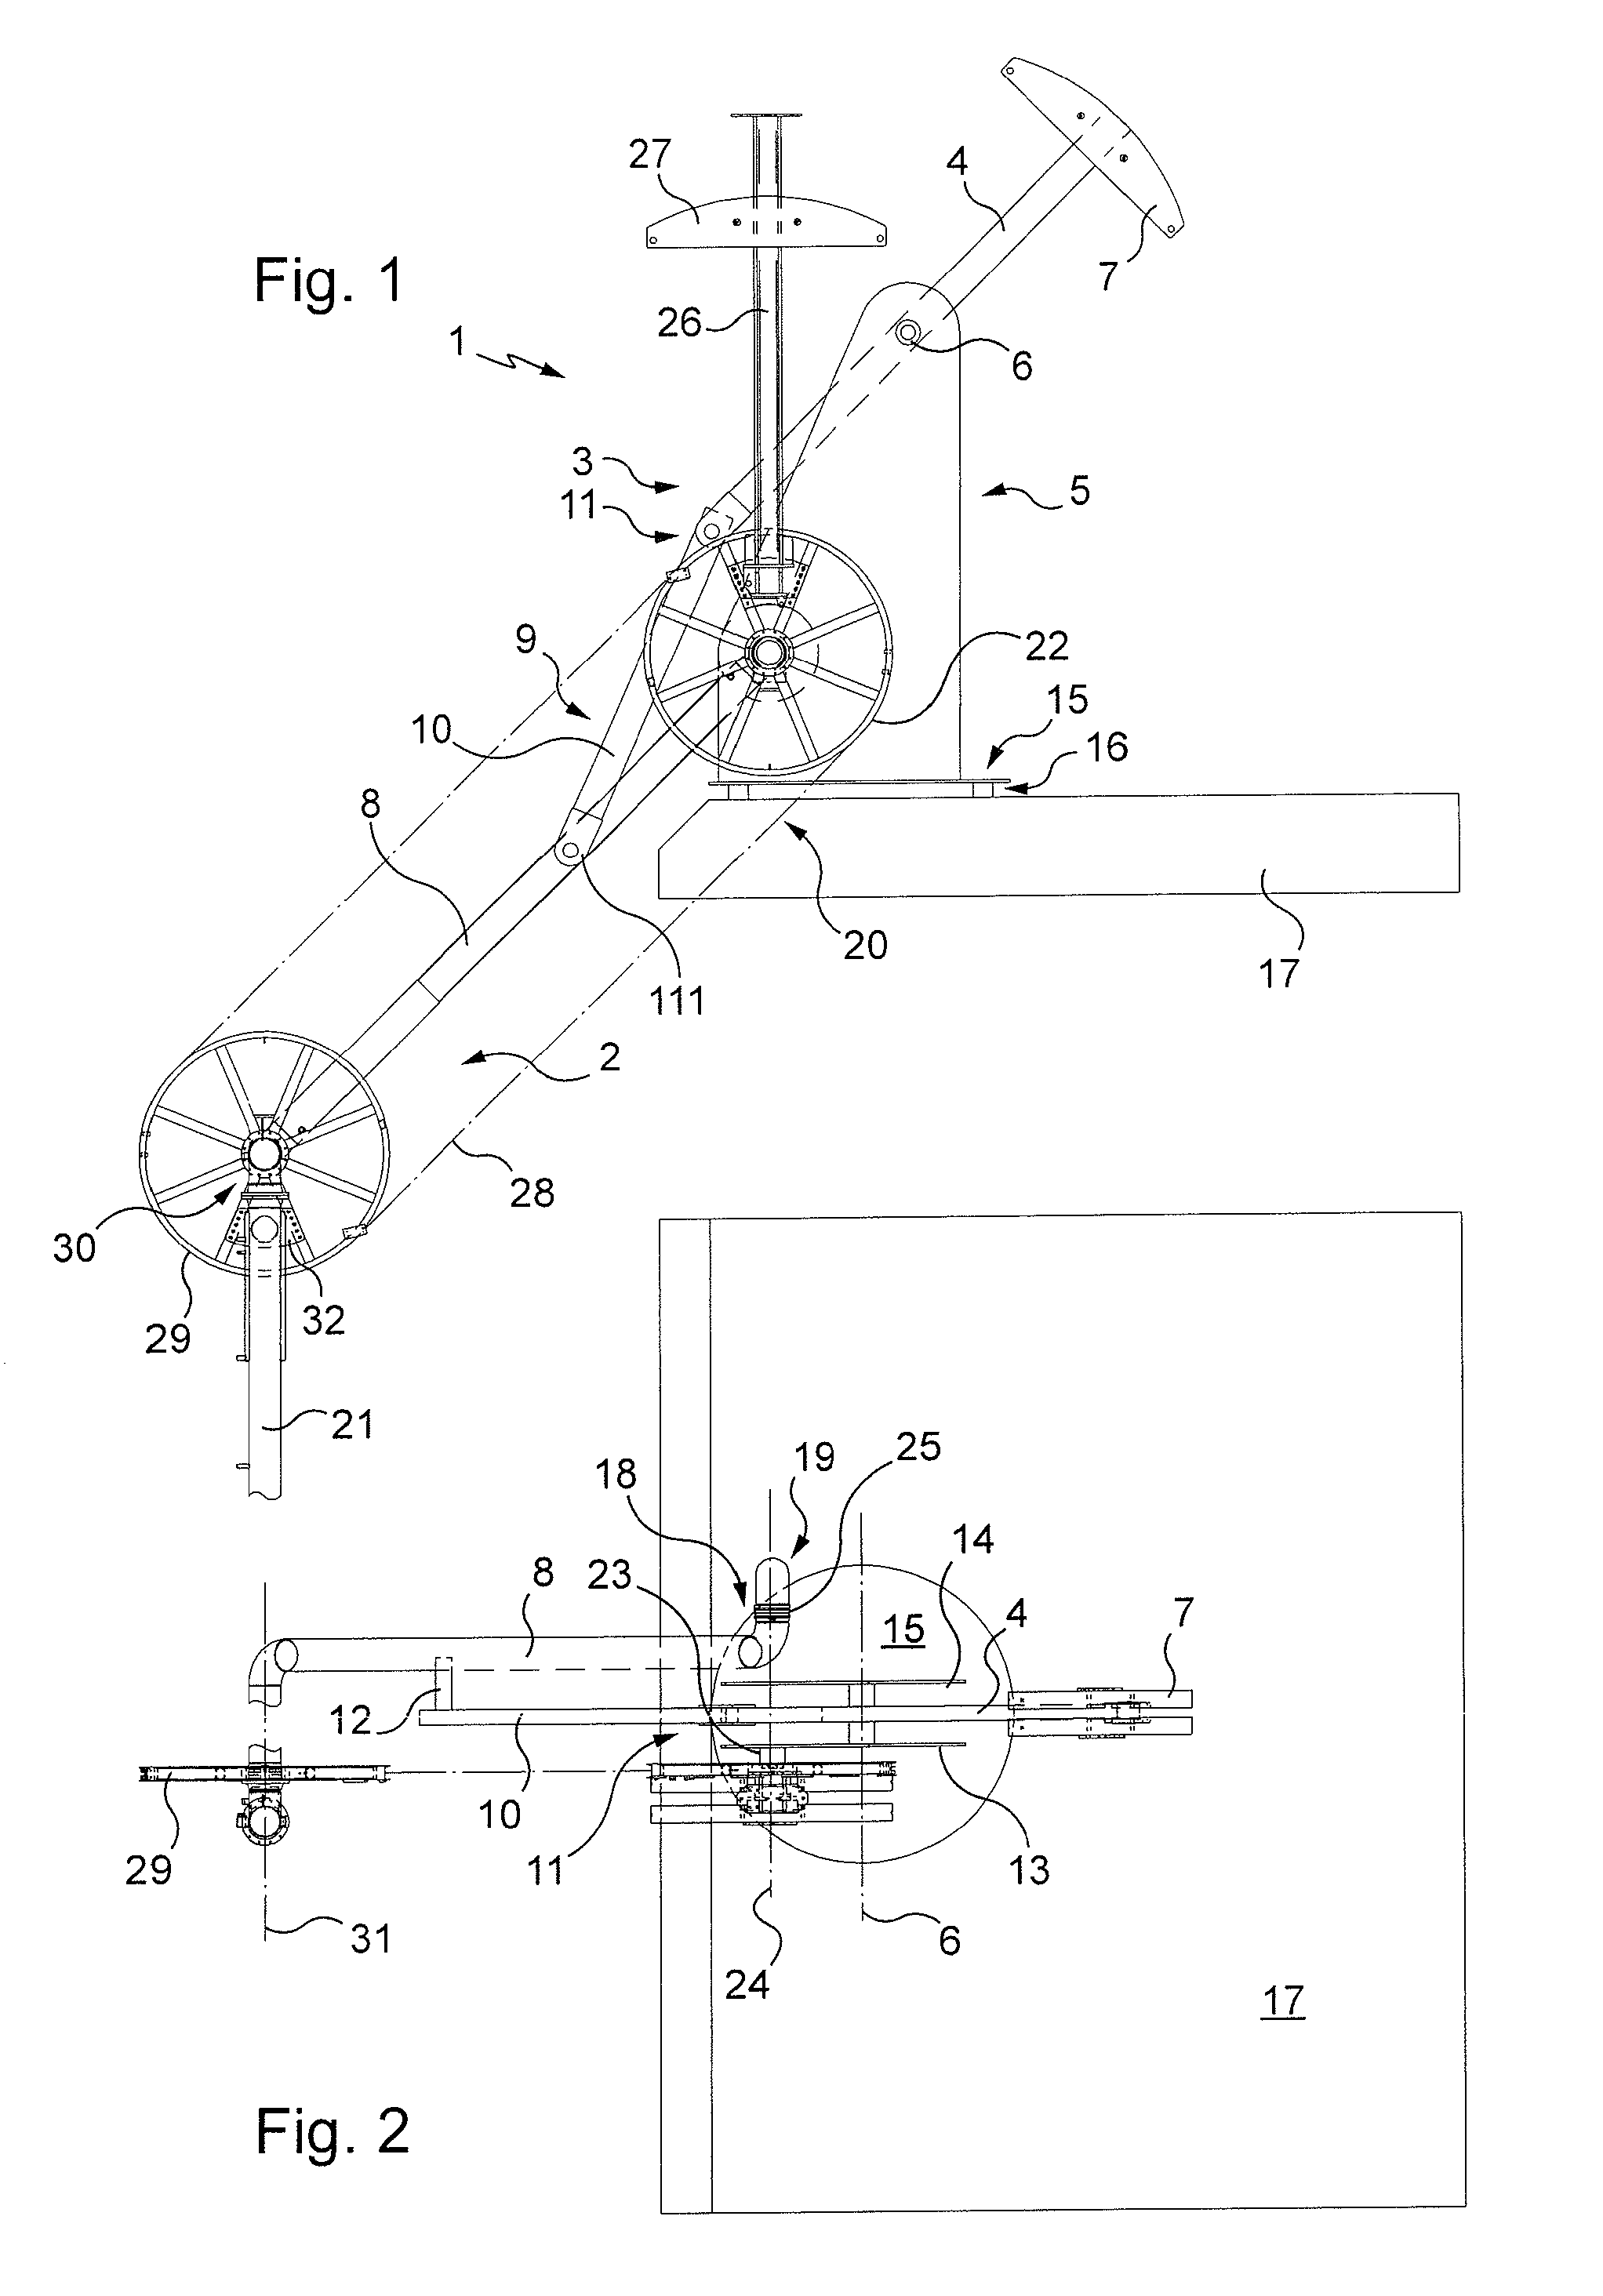 Balanced loading arm without a base for transferring a fluid product